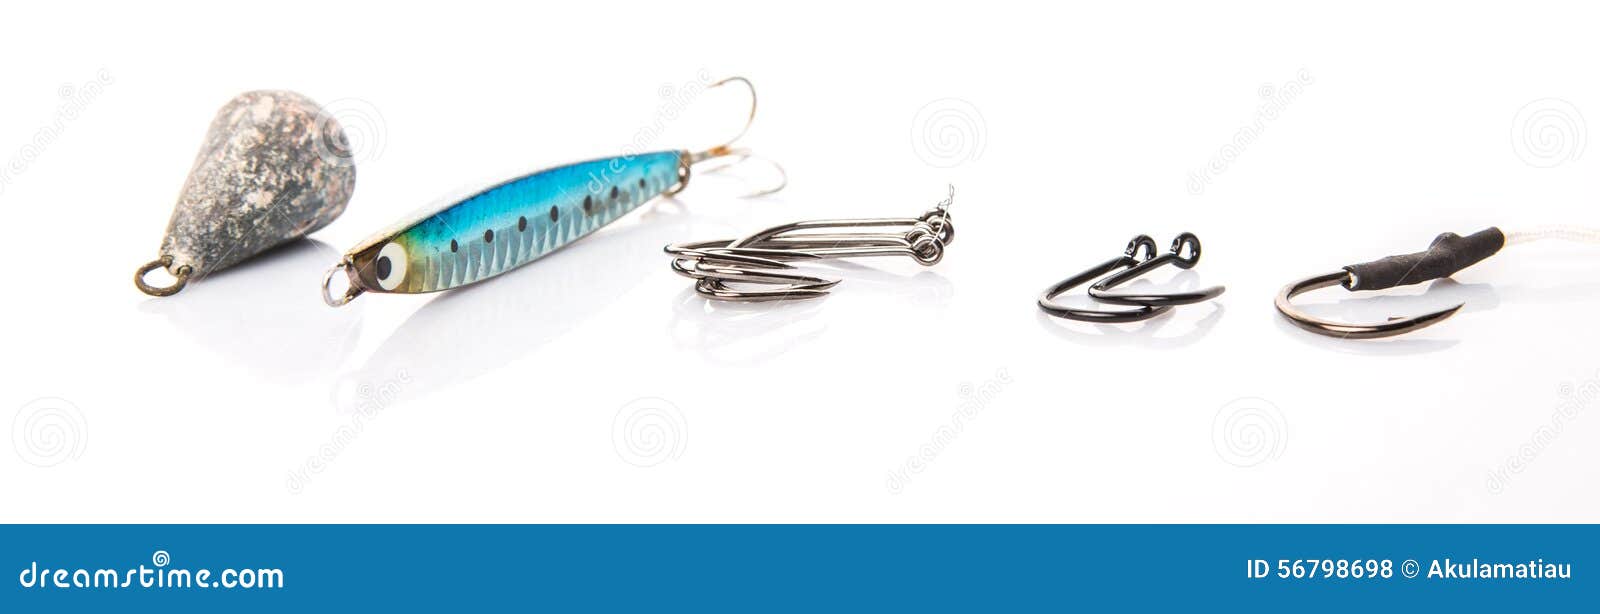 fish hook, lure and sinker